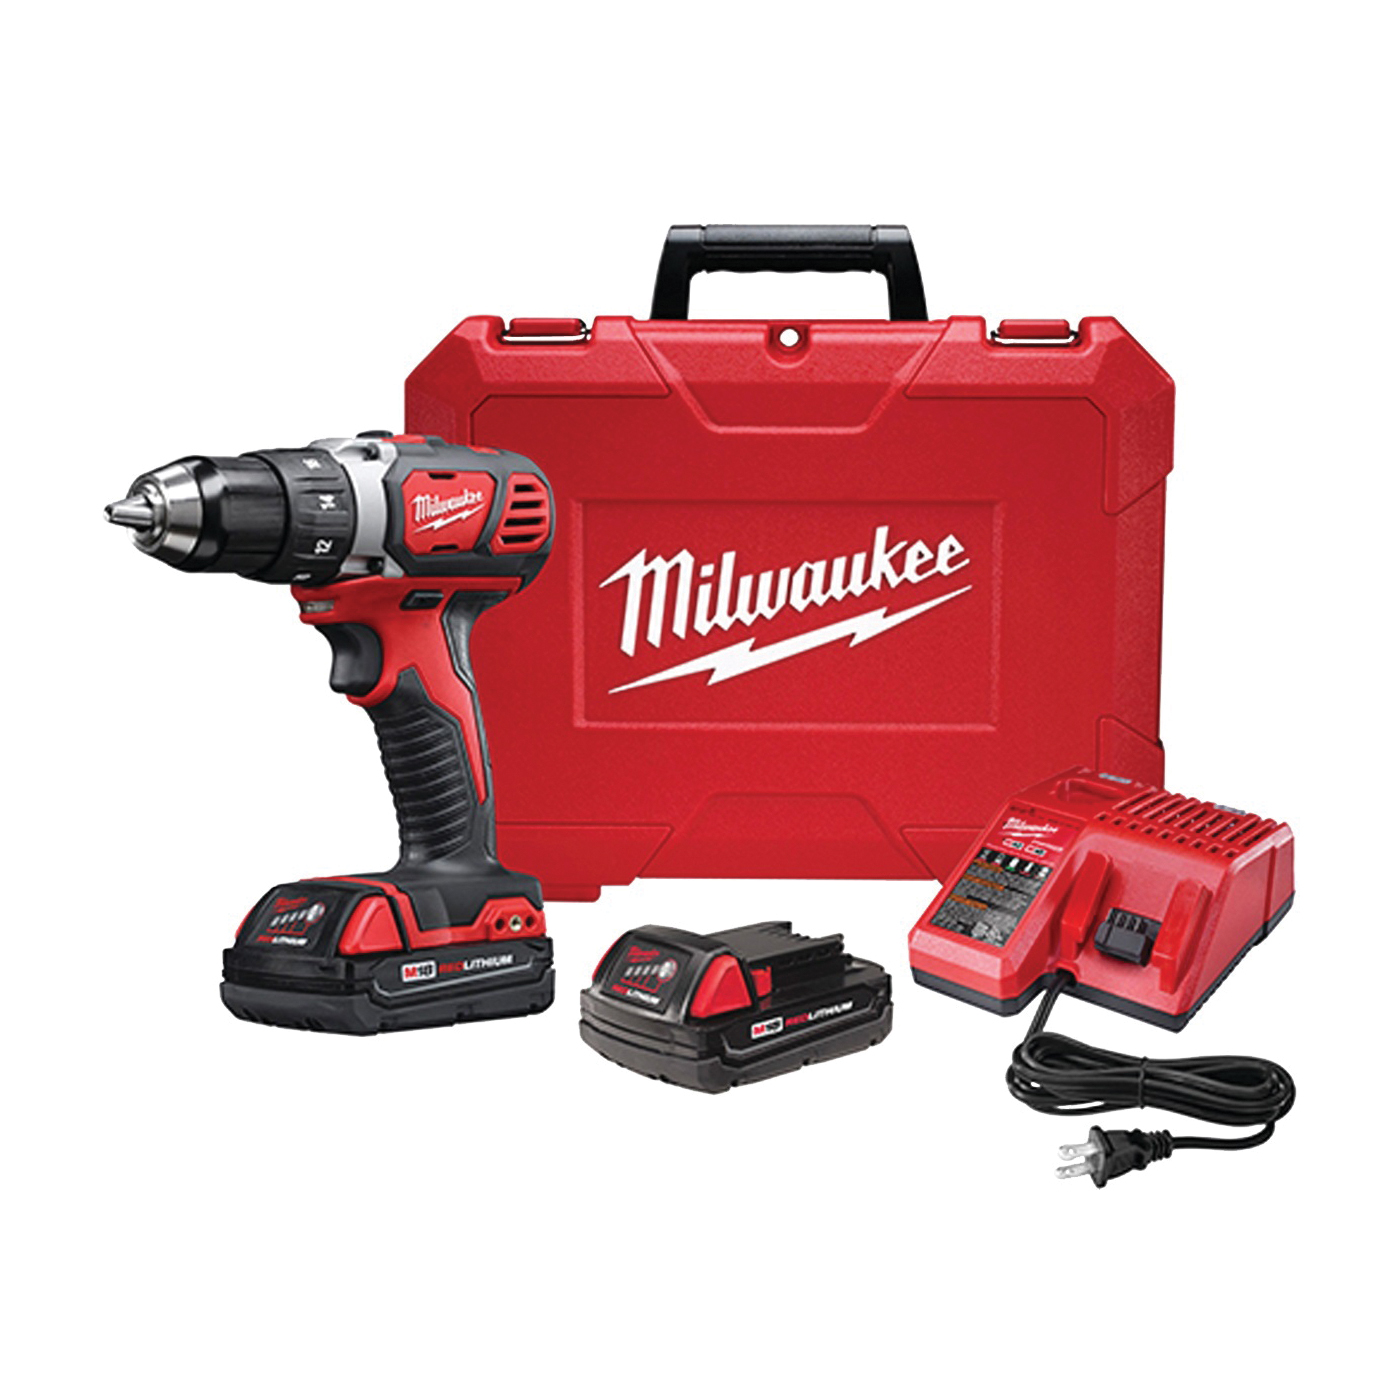 Milwaukee 2606-22CT Drill/Driver Kit, Battery Included, 18 V, 1.5, 3 Ah, 1/2 in Chuck, Keyless Chuck